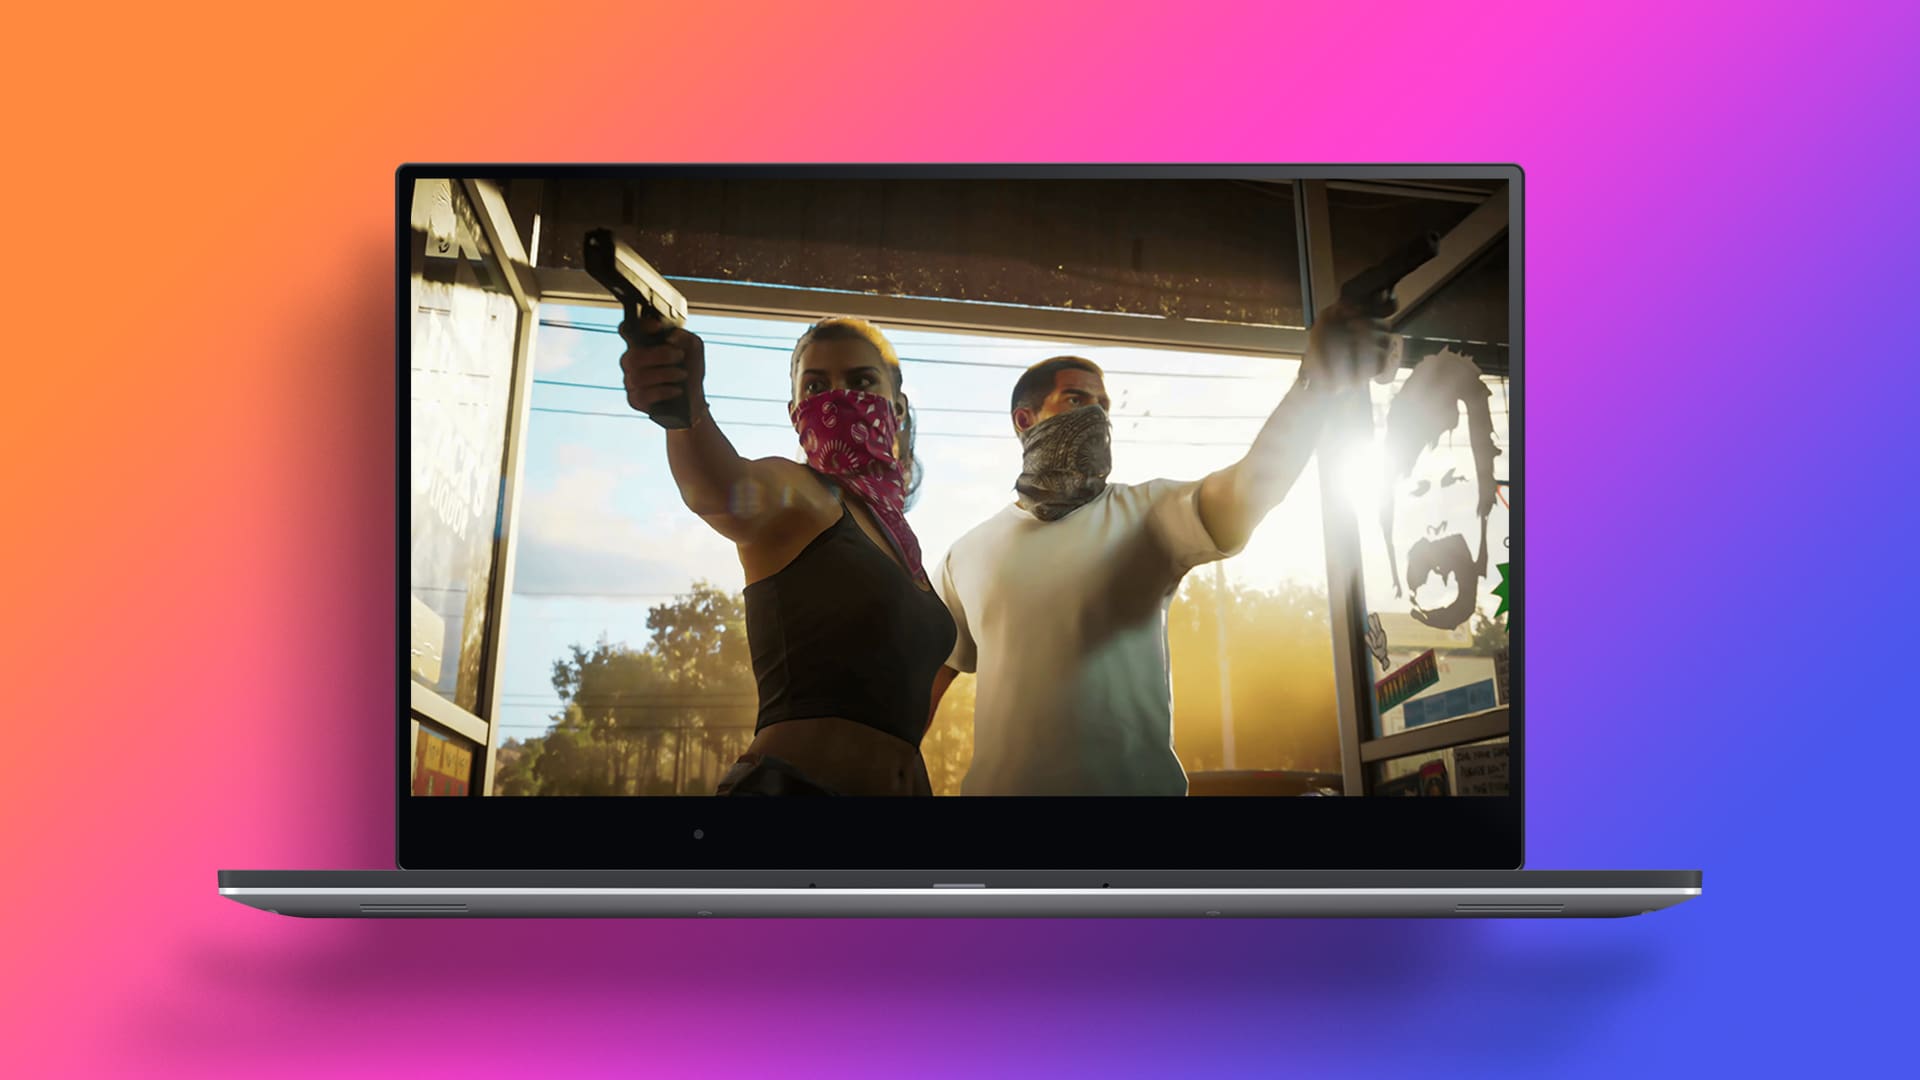 Jason and Lucia in action as shown in GTA 6 trailer